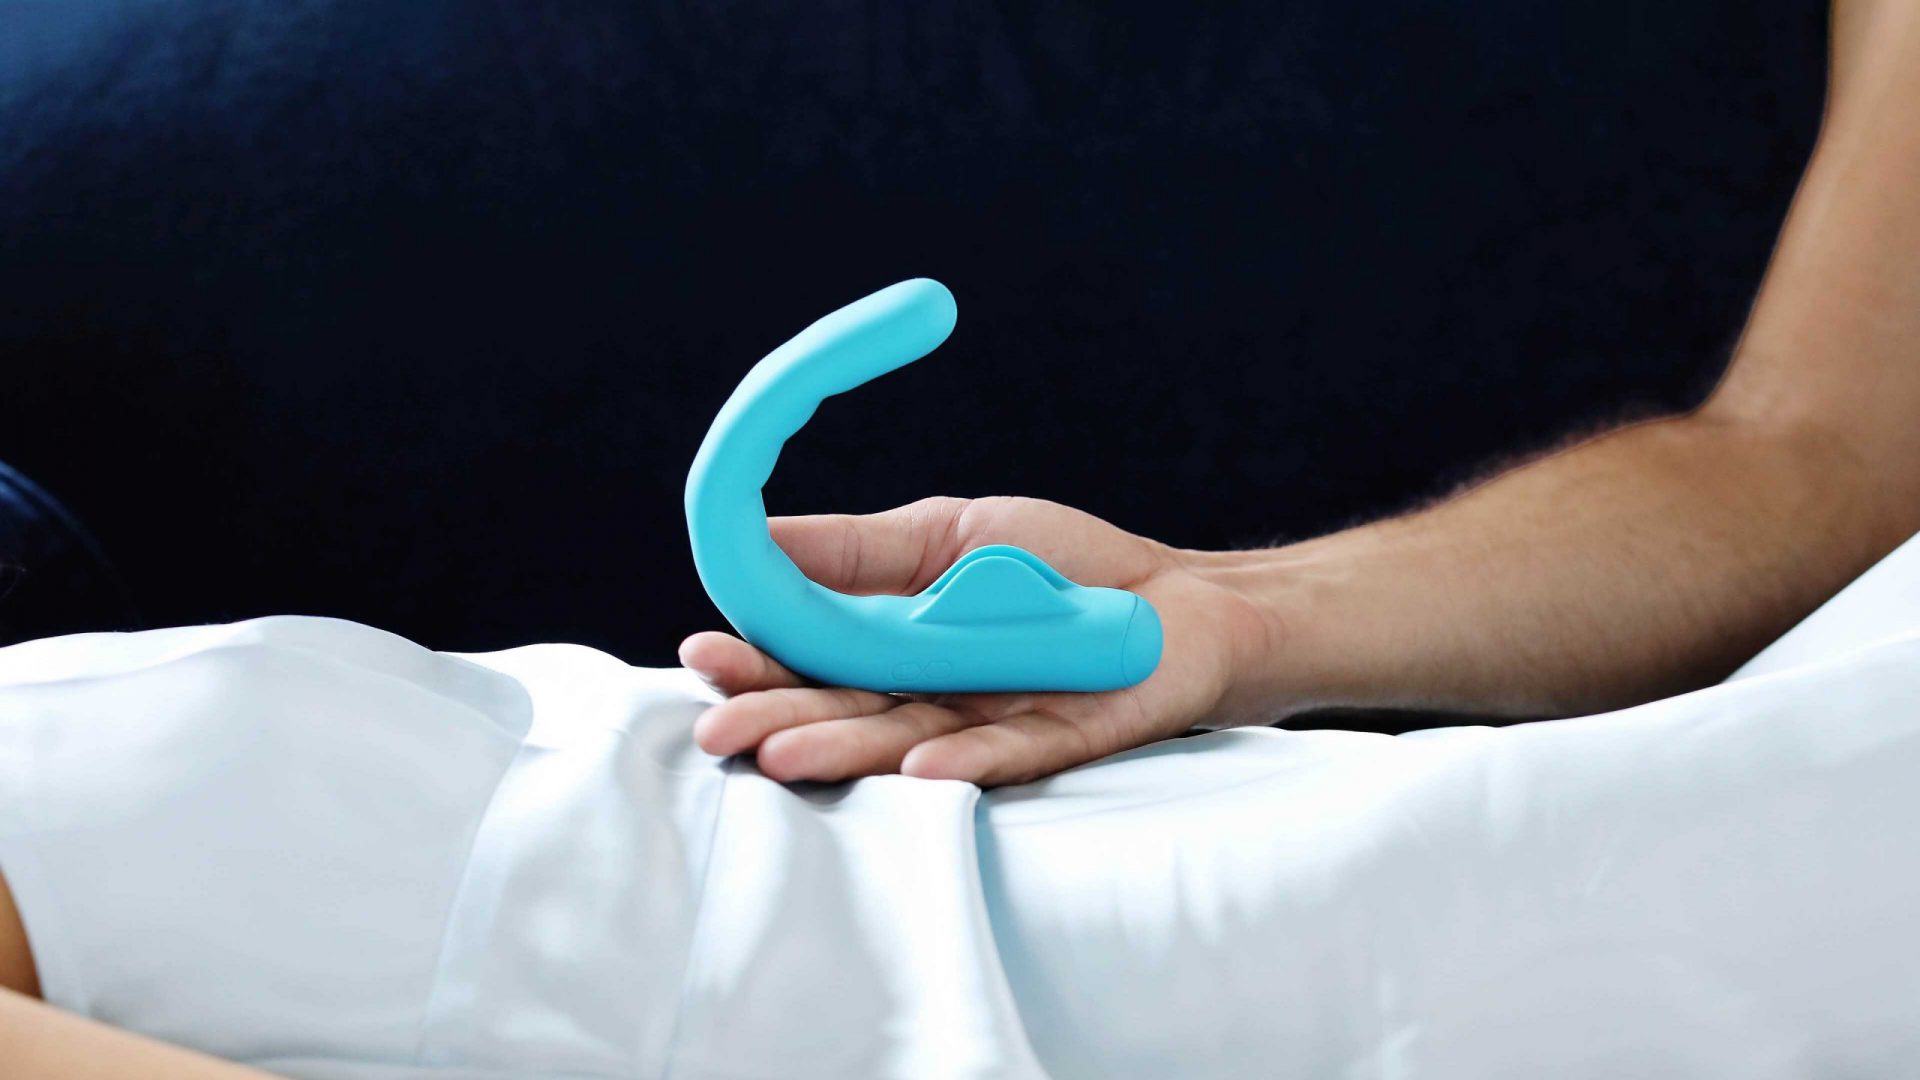 Sex toy designs 10 products for you to get inspired DesignWanted photo